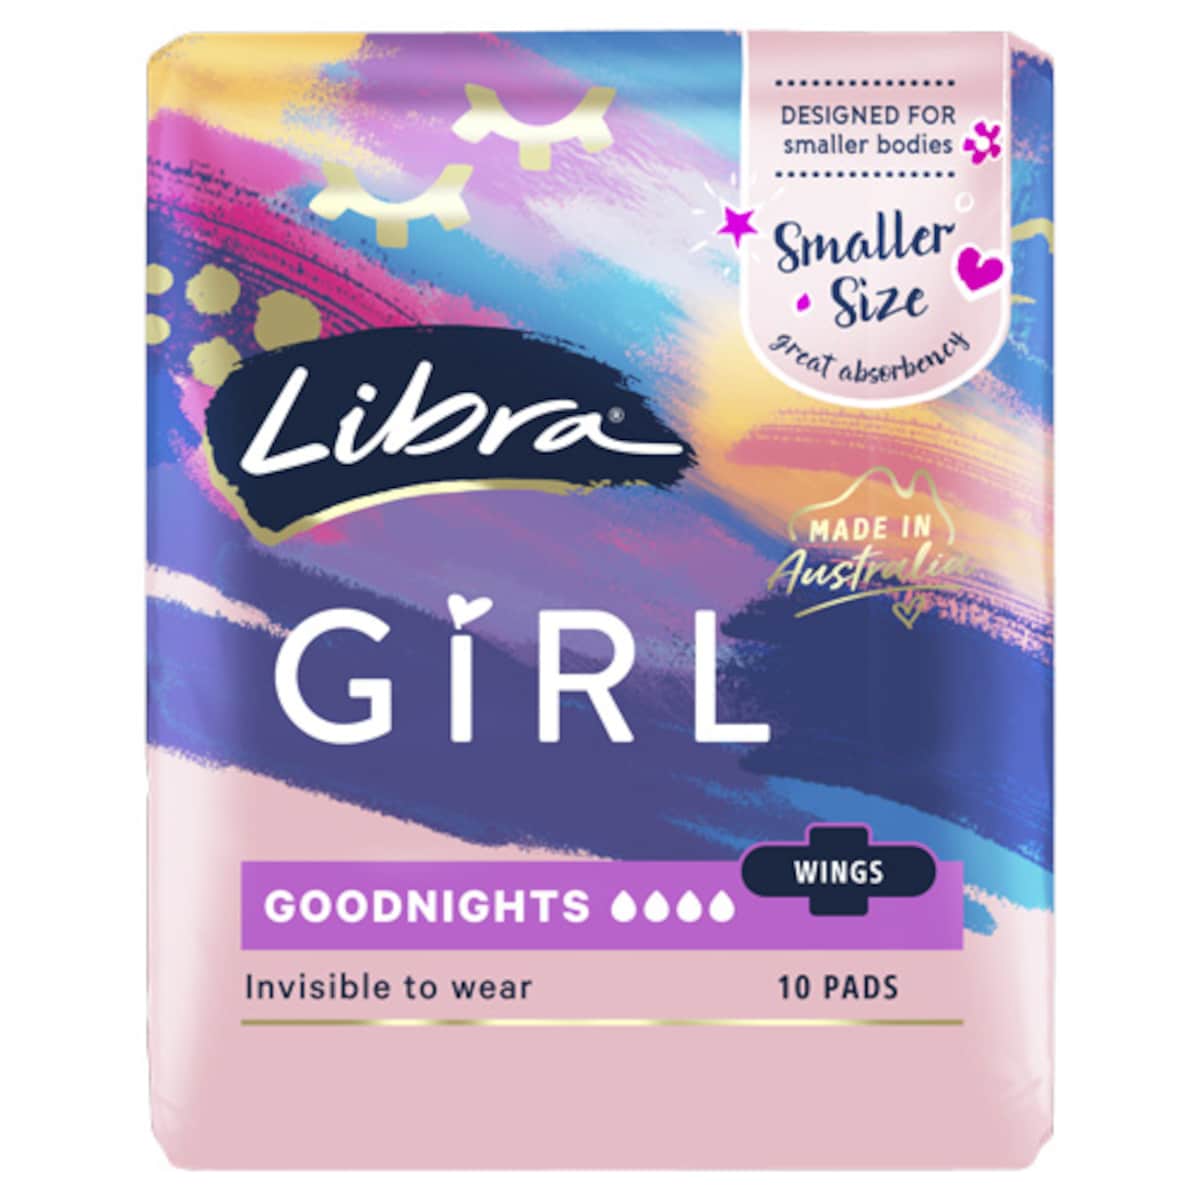 Libra Girl Goodnight Pads with Wings 10 Pack